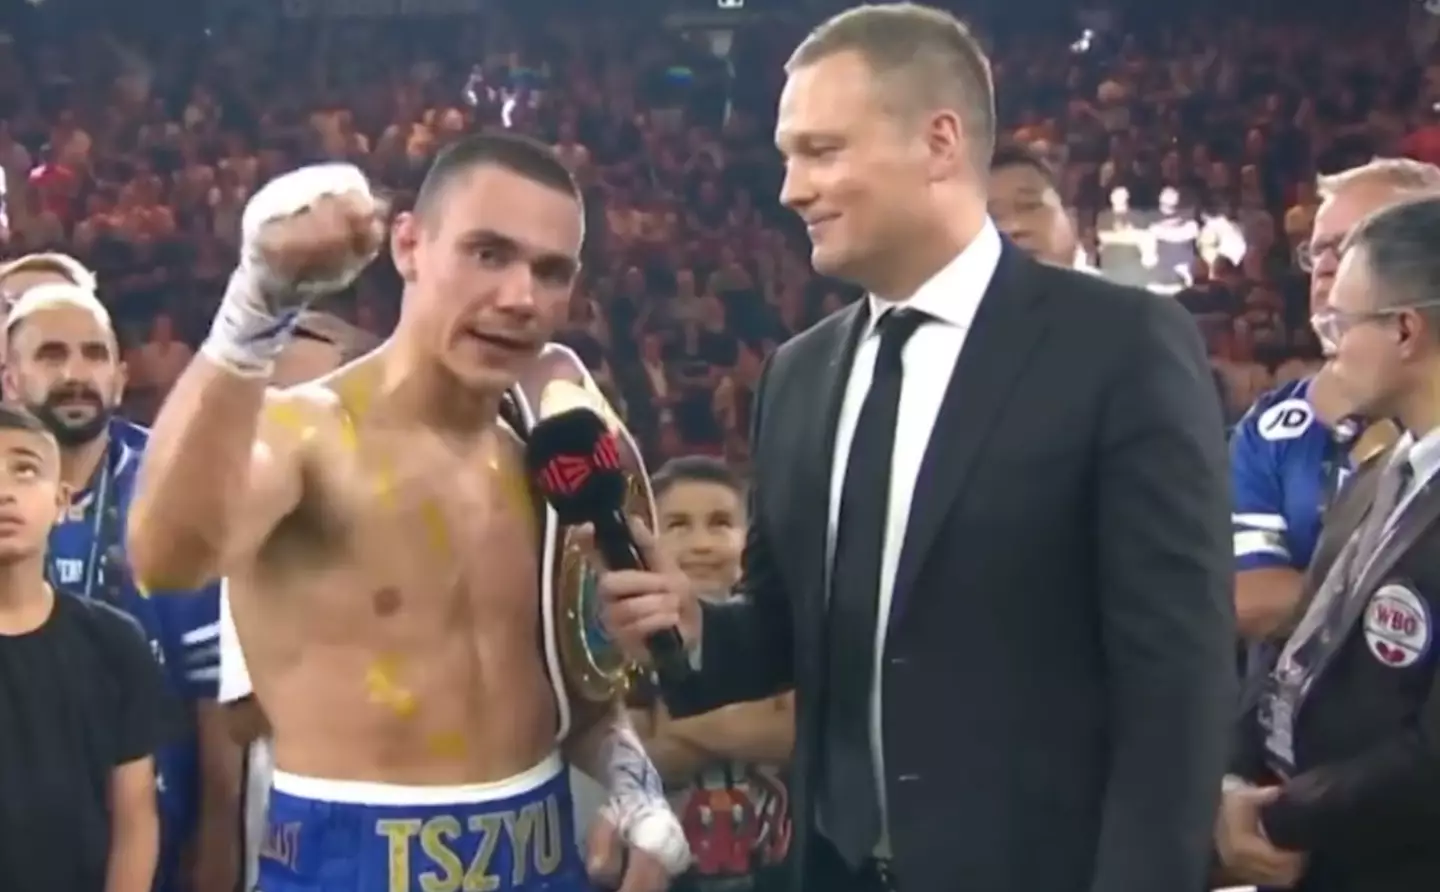 Tim Tszyu had words for Jermell Charlo after his win.